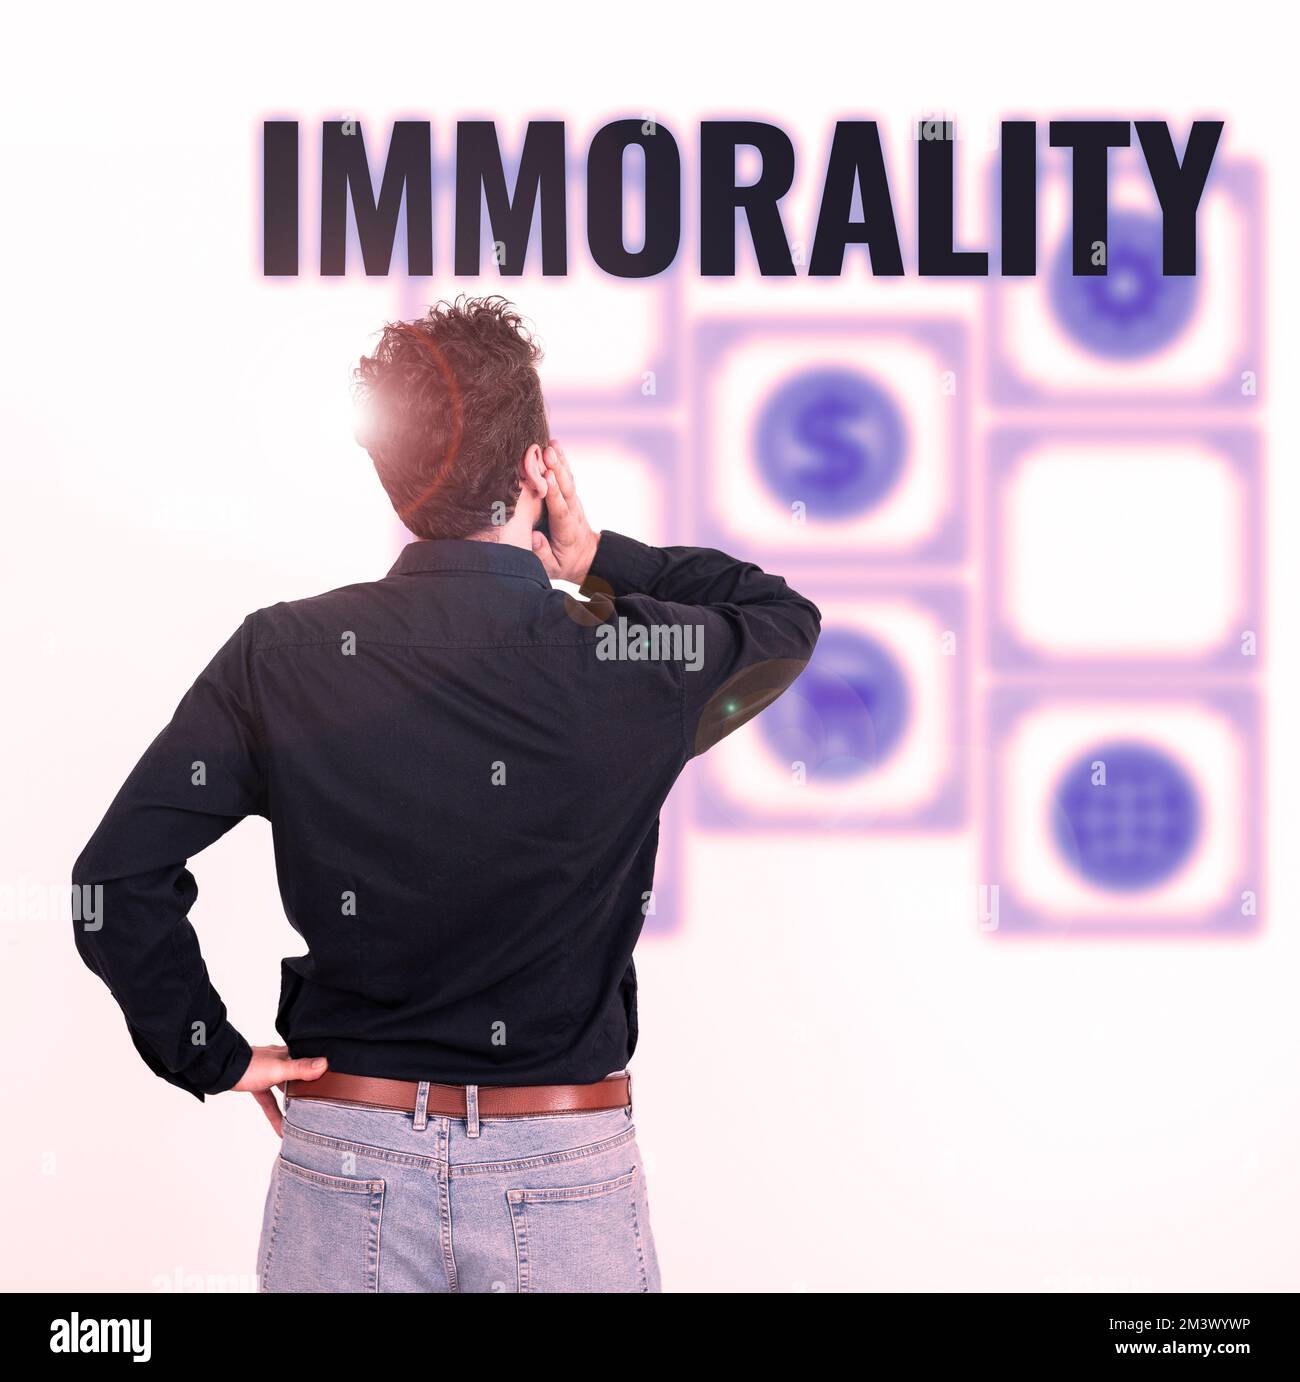 Sign displaying Immorality. Internet Concept the state or quality of being immoral, wickedness Stock Photo